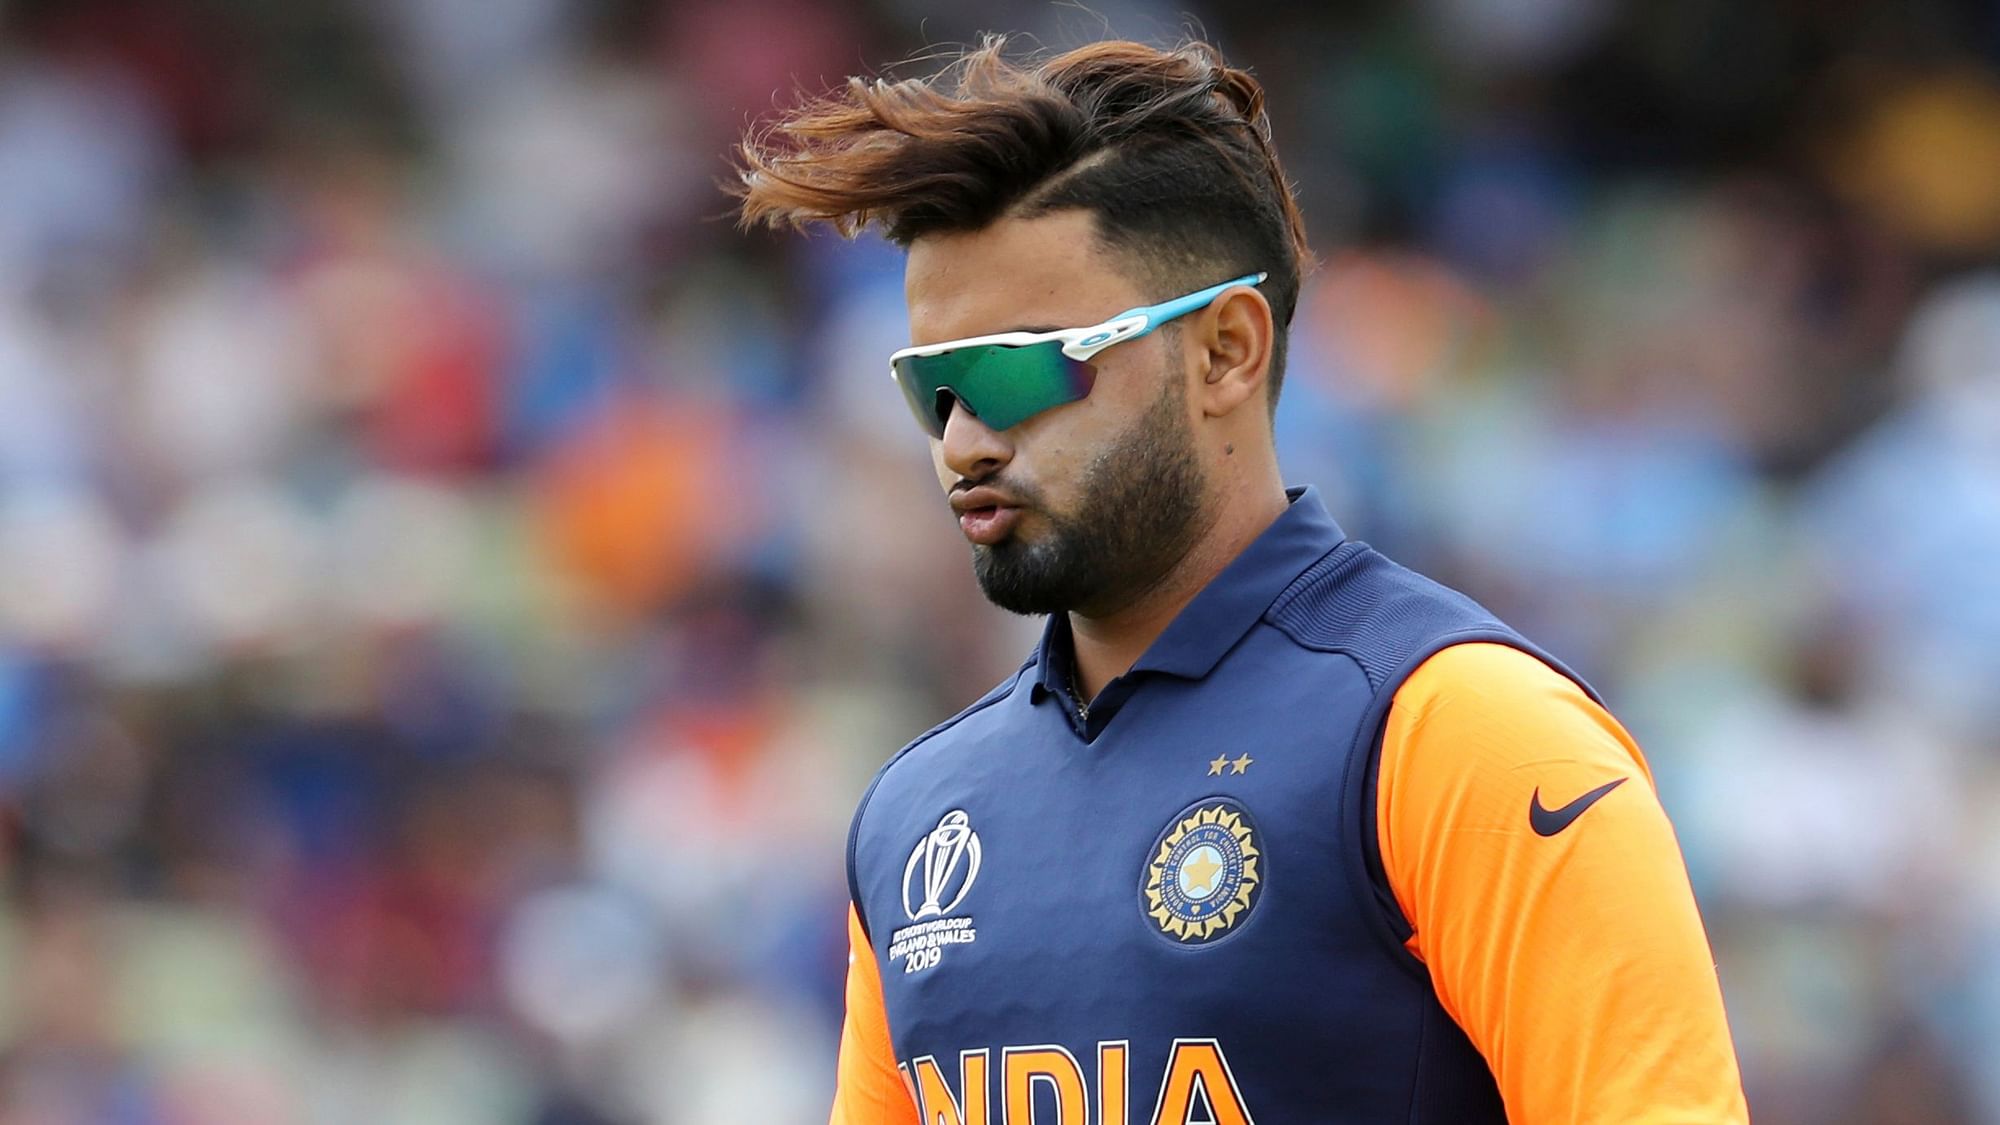 Rishabh Pant fields during the Cricket World Cup match between India and England in Birmingham.